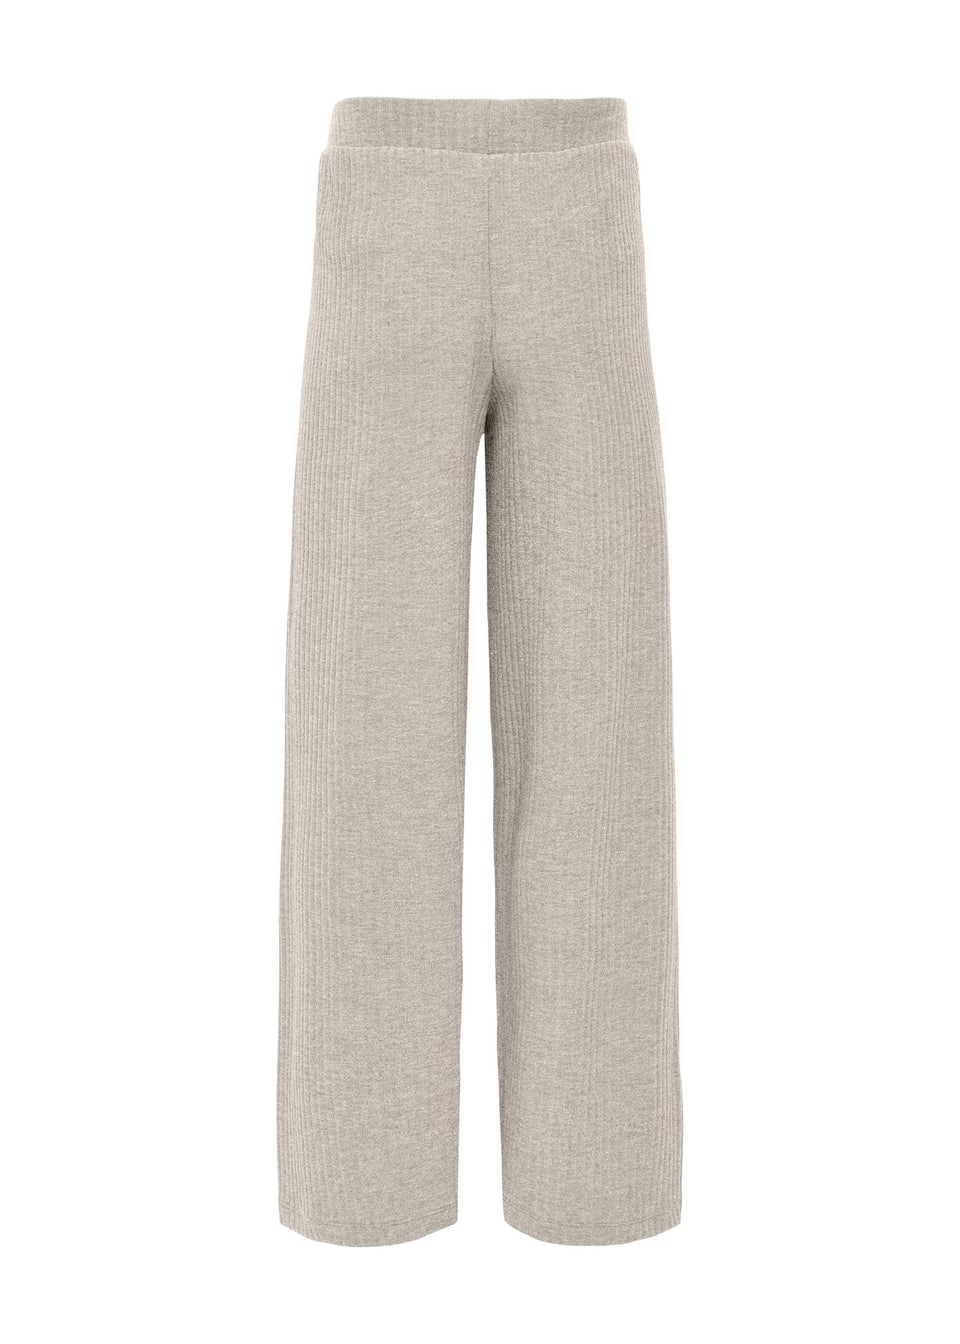 ONLY Girls Beige Wide Kognella Trousers (6-13yrs)